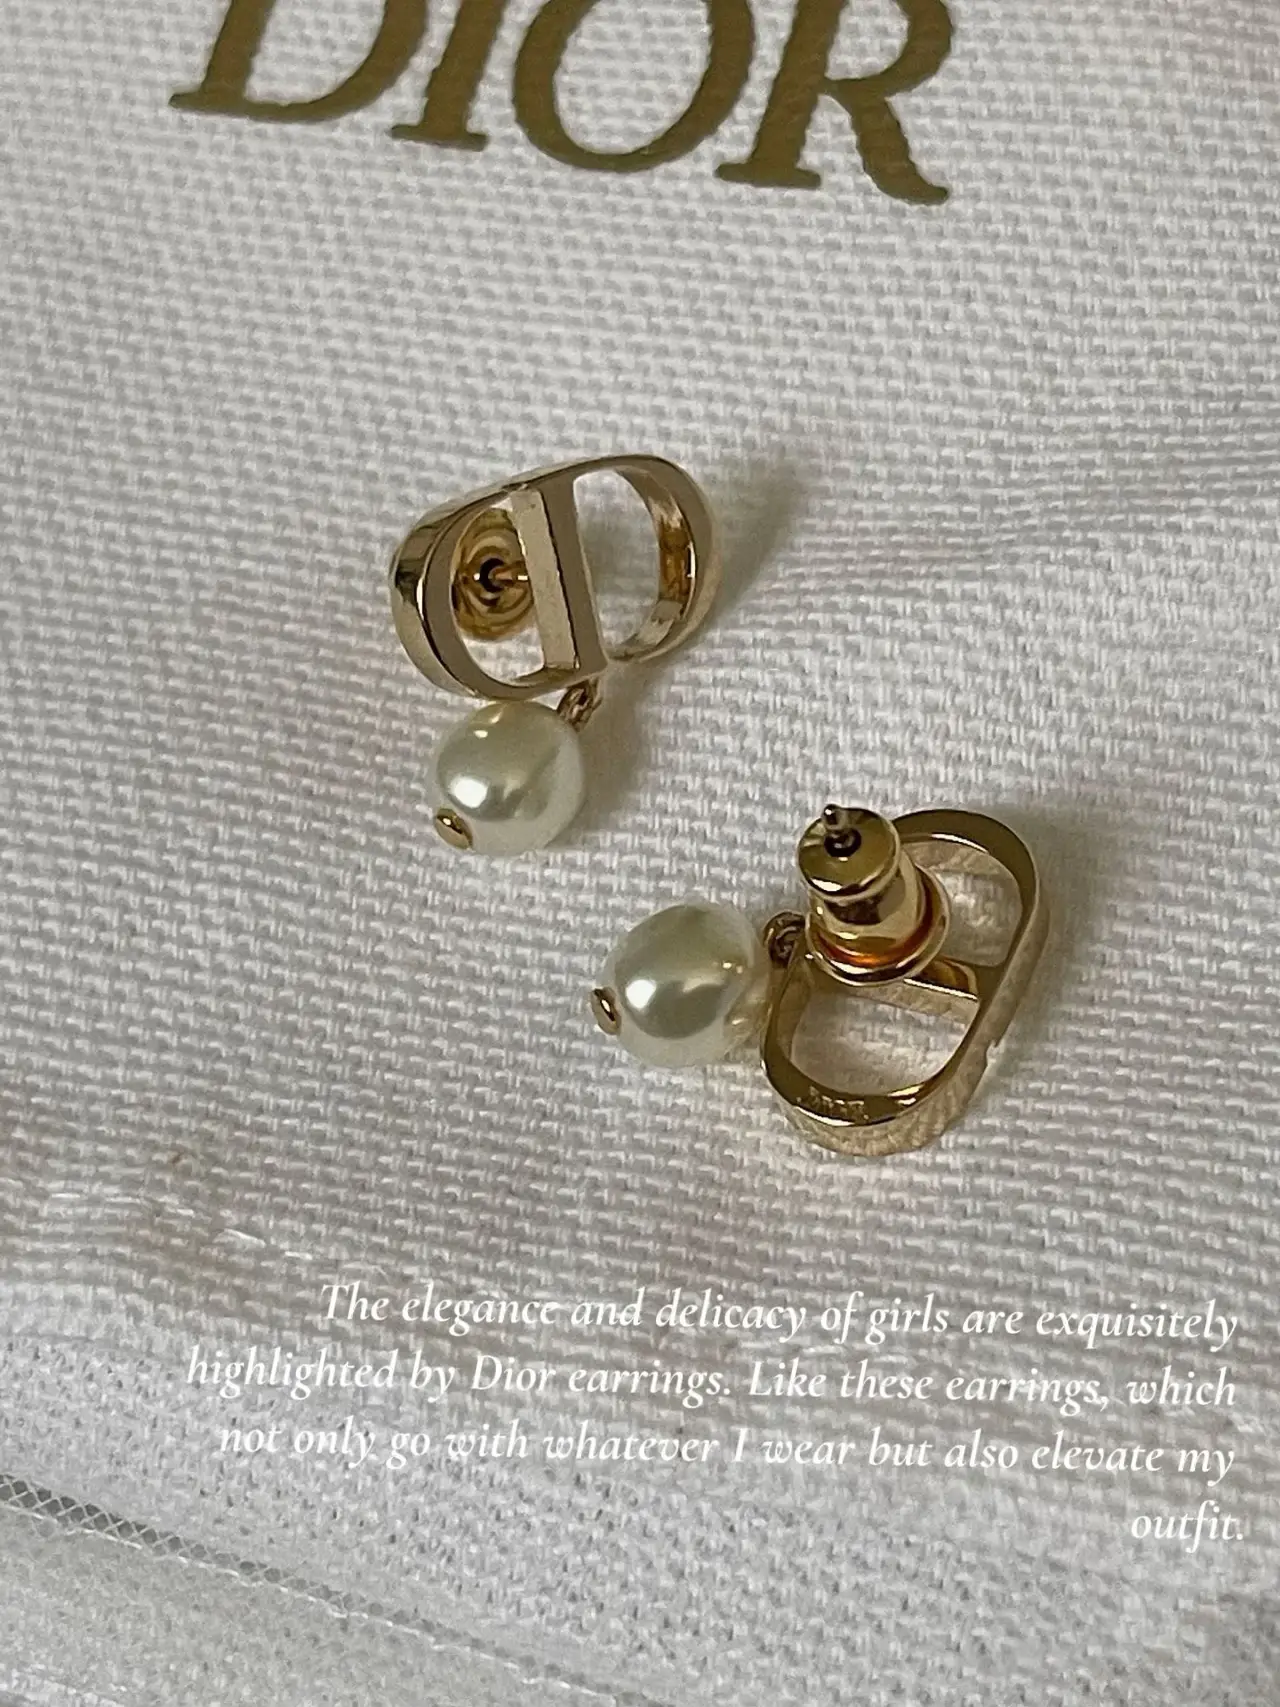 Dior - Petit CD Mini Stud Earrings Gold-finish Metal and Silver-Tone Crystals - Women Jewelry